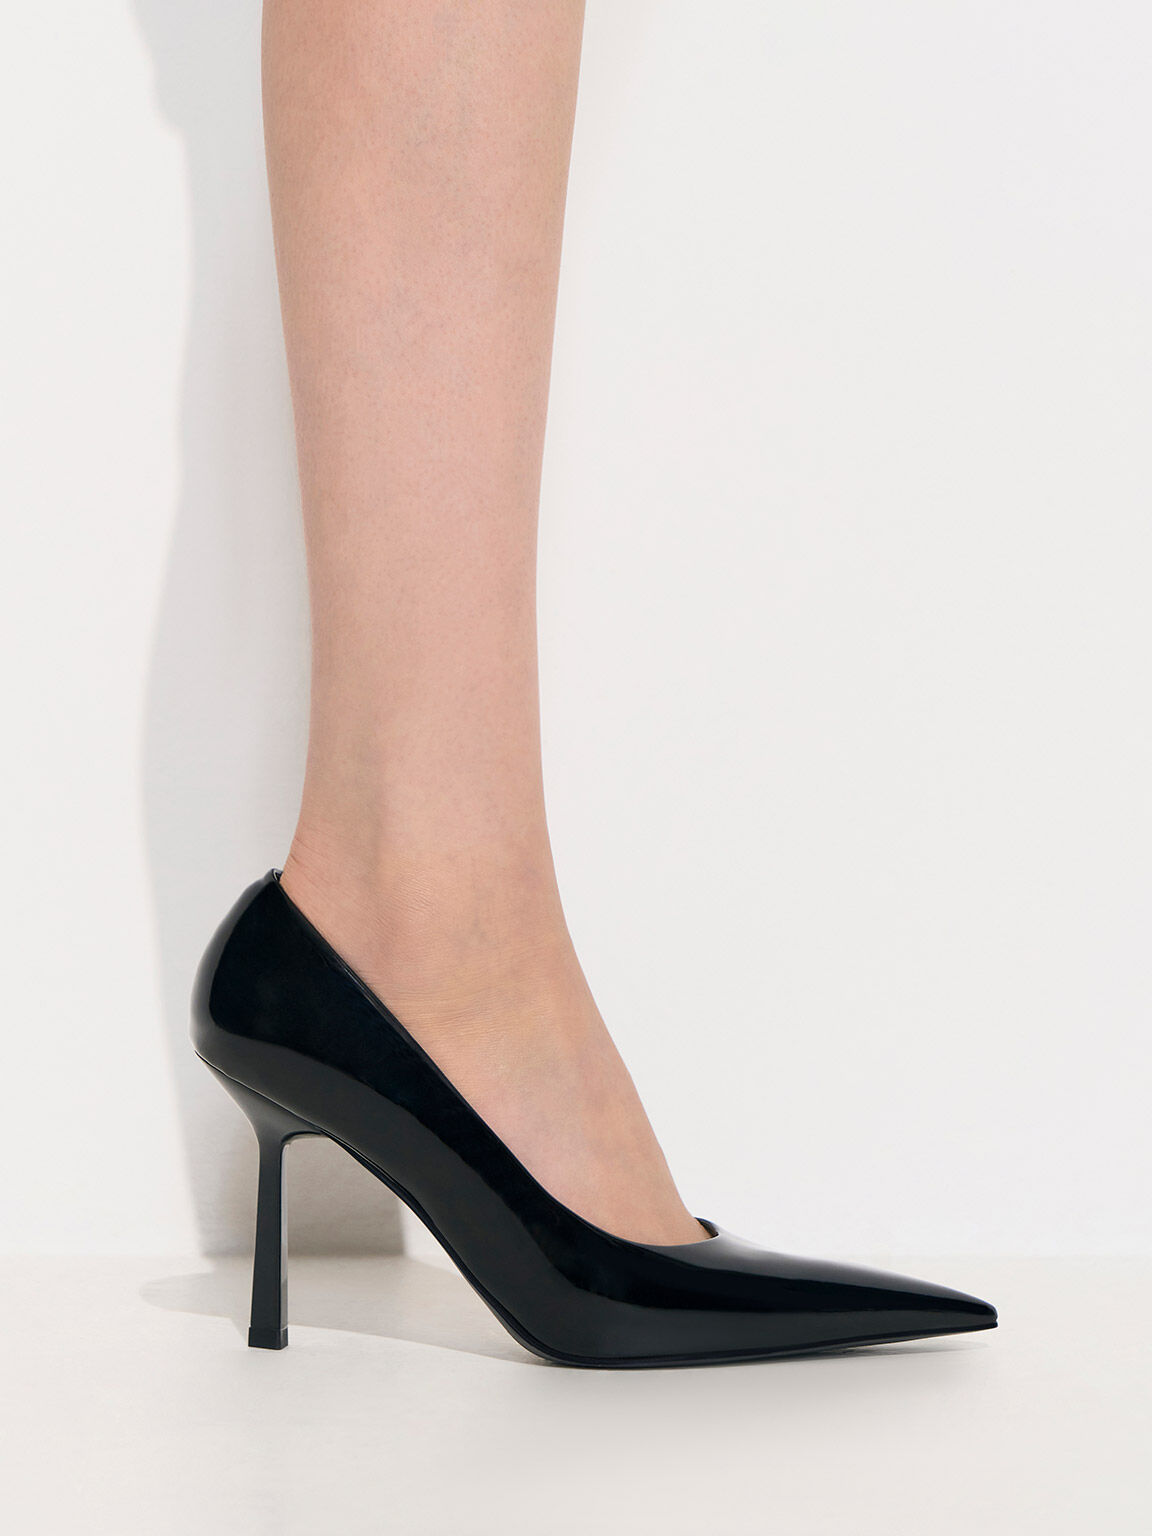 Black Patent Pointed-Toe Pumps - CHARLES & KEITH CA